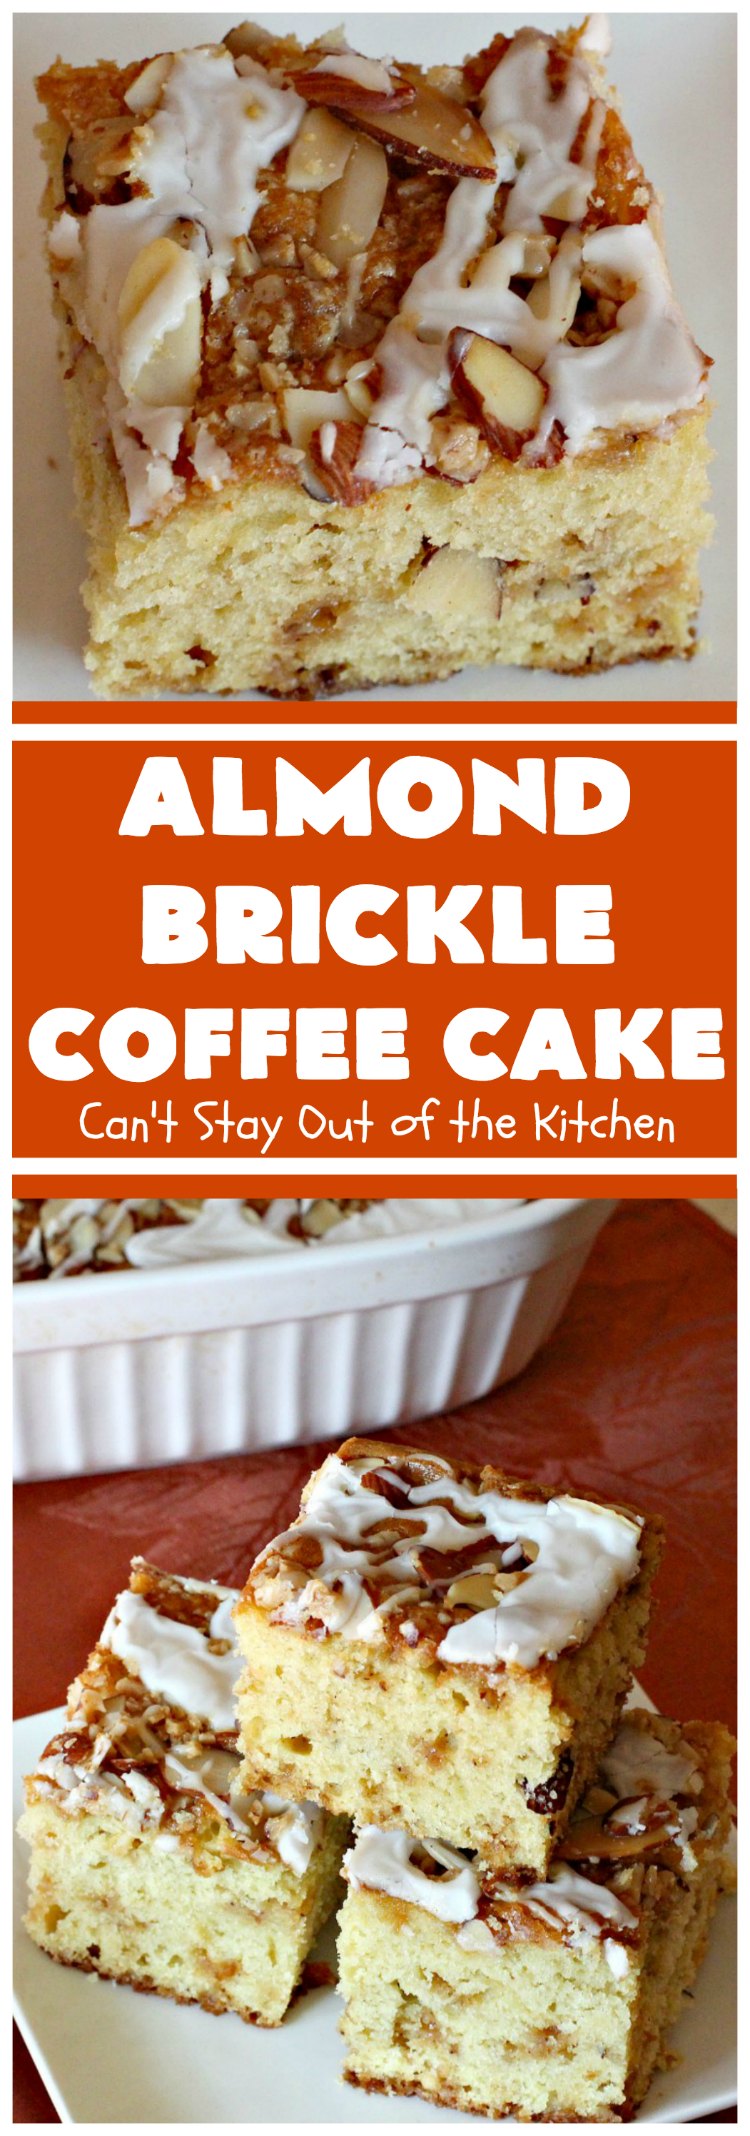 Almond Brickle Coffee Cake | Can't Stay Out of the Kitchen